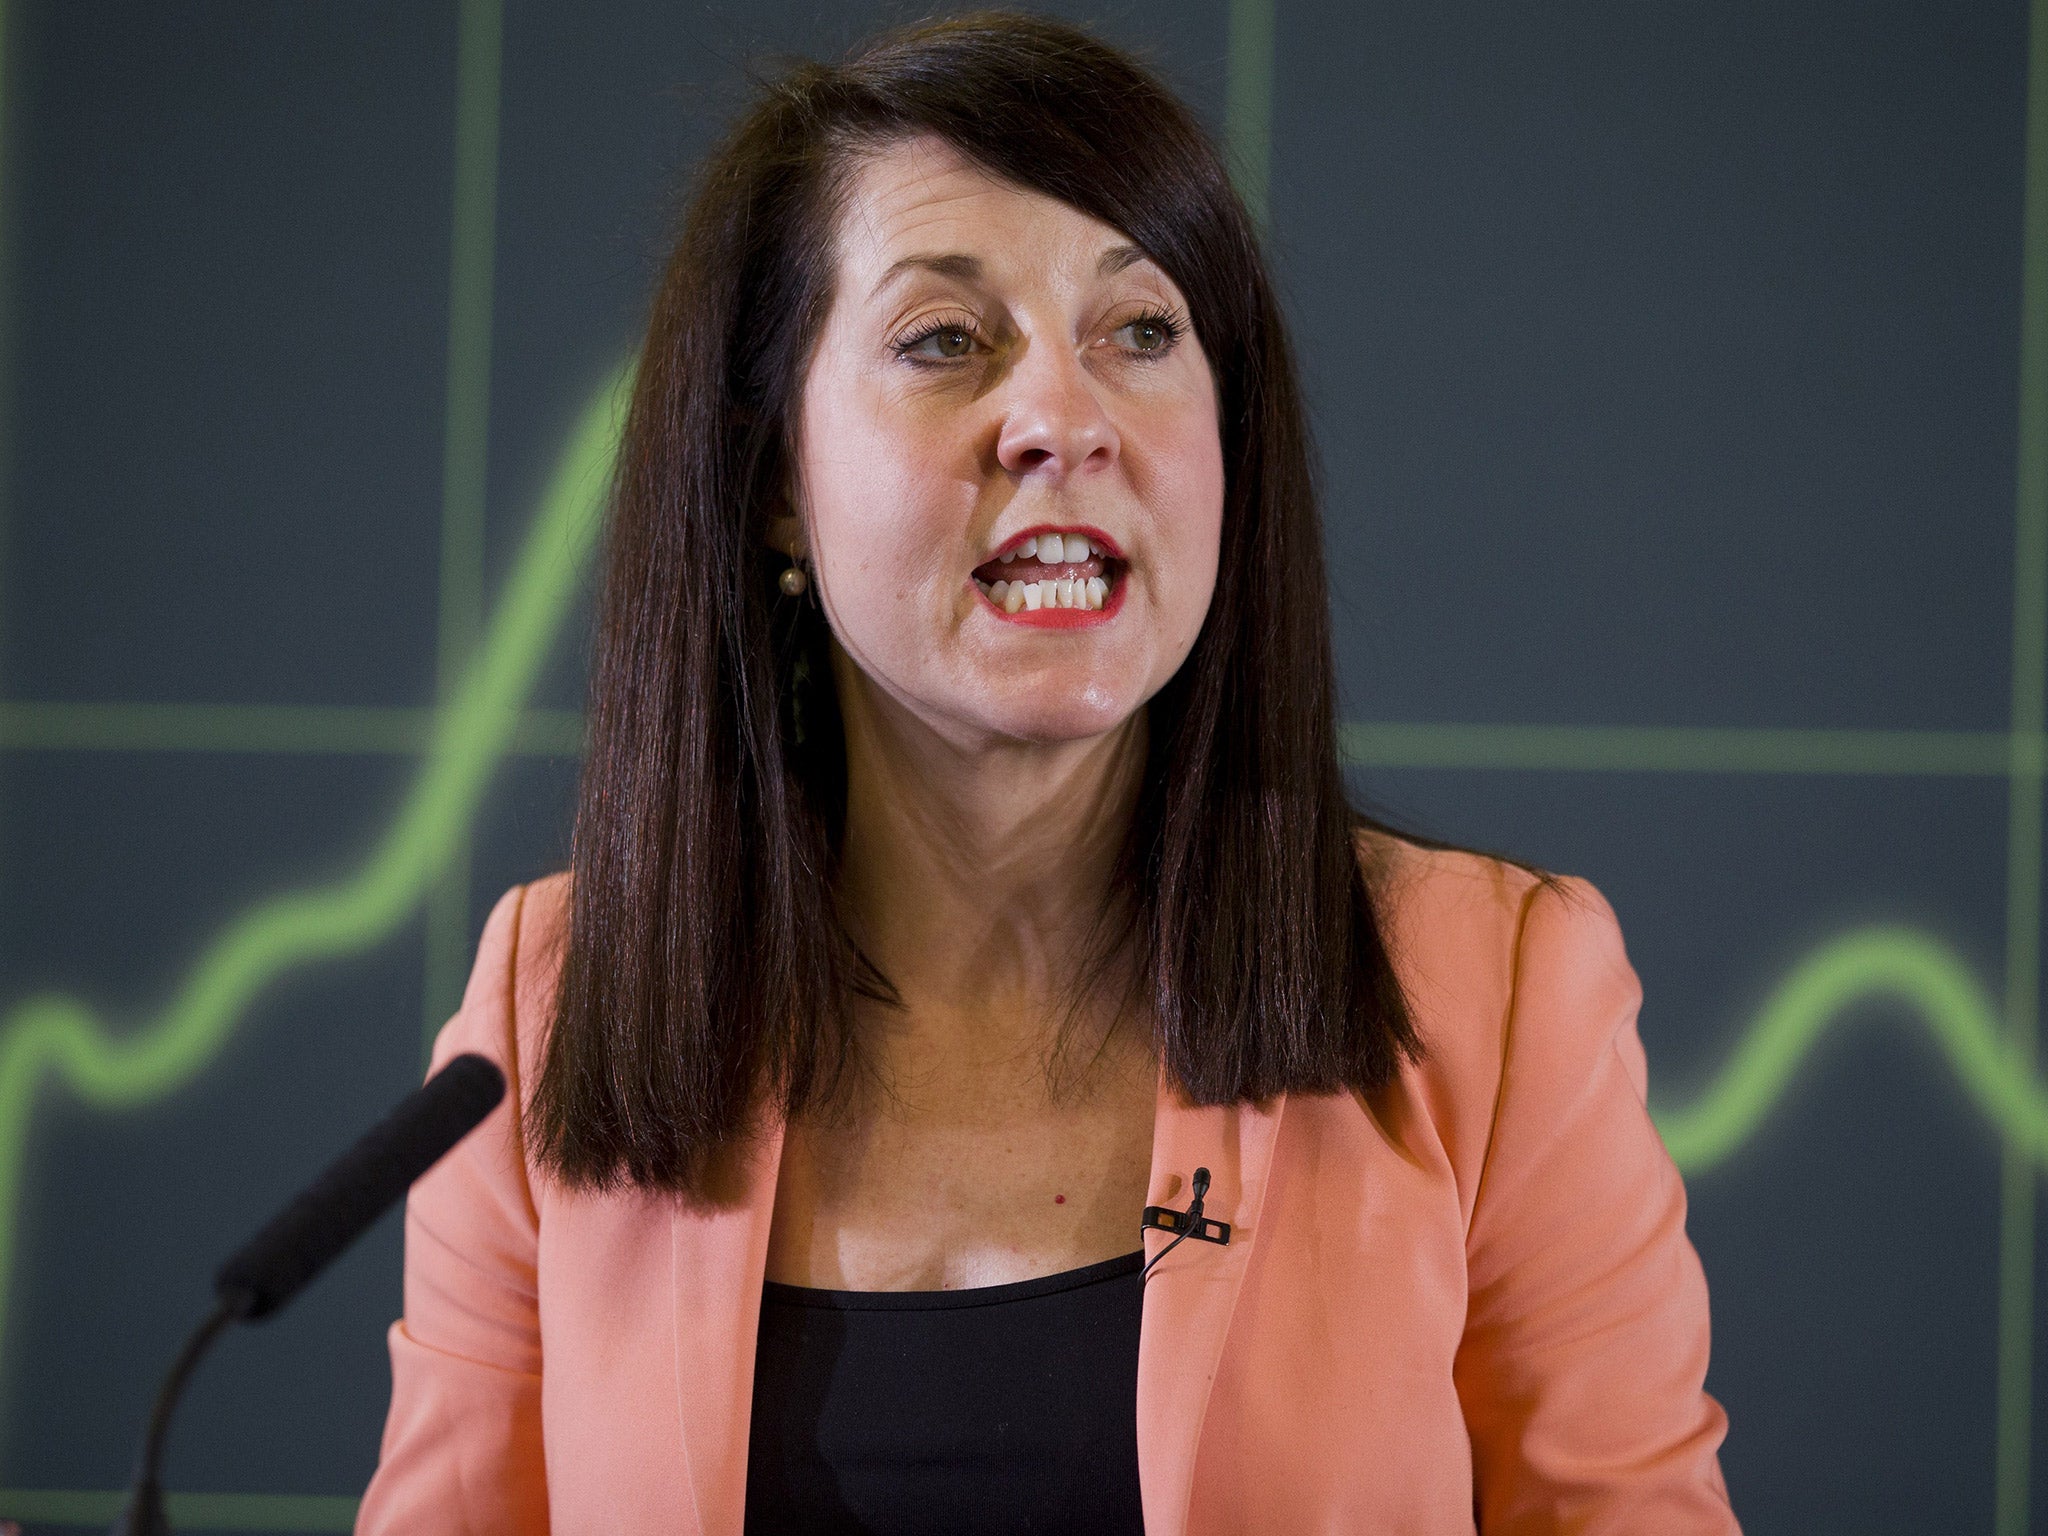 Labour leadership contender Liz Kendall says she will review the way Lottery money is spent, with the intention of boosting support for children